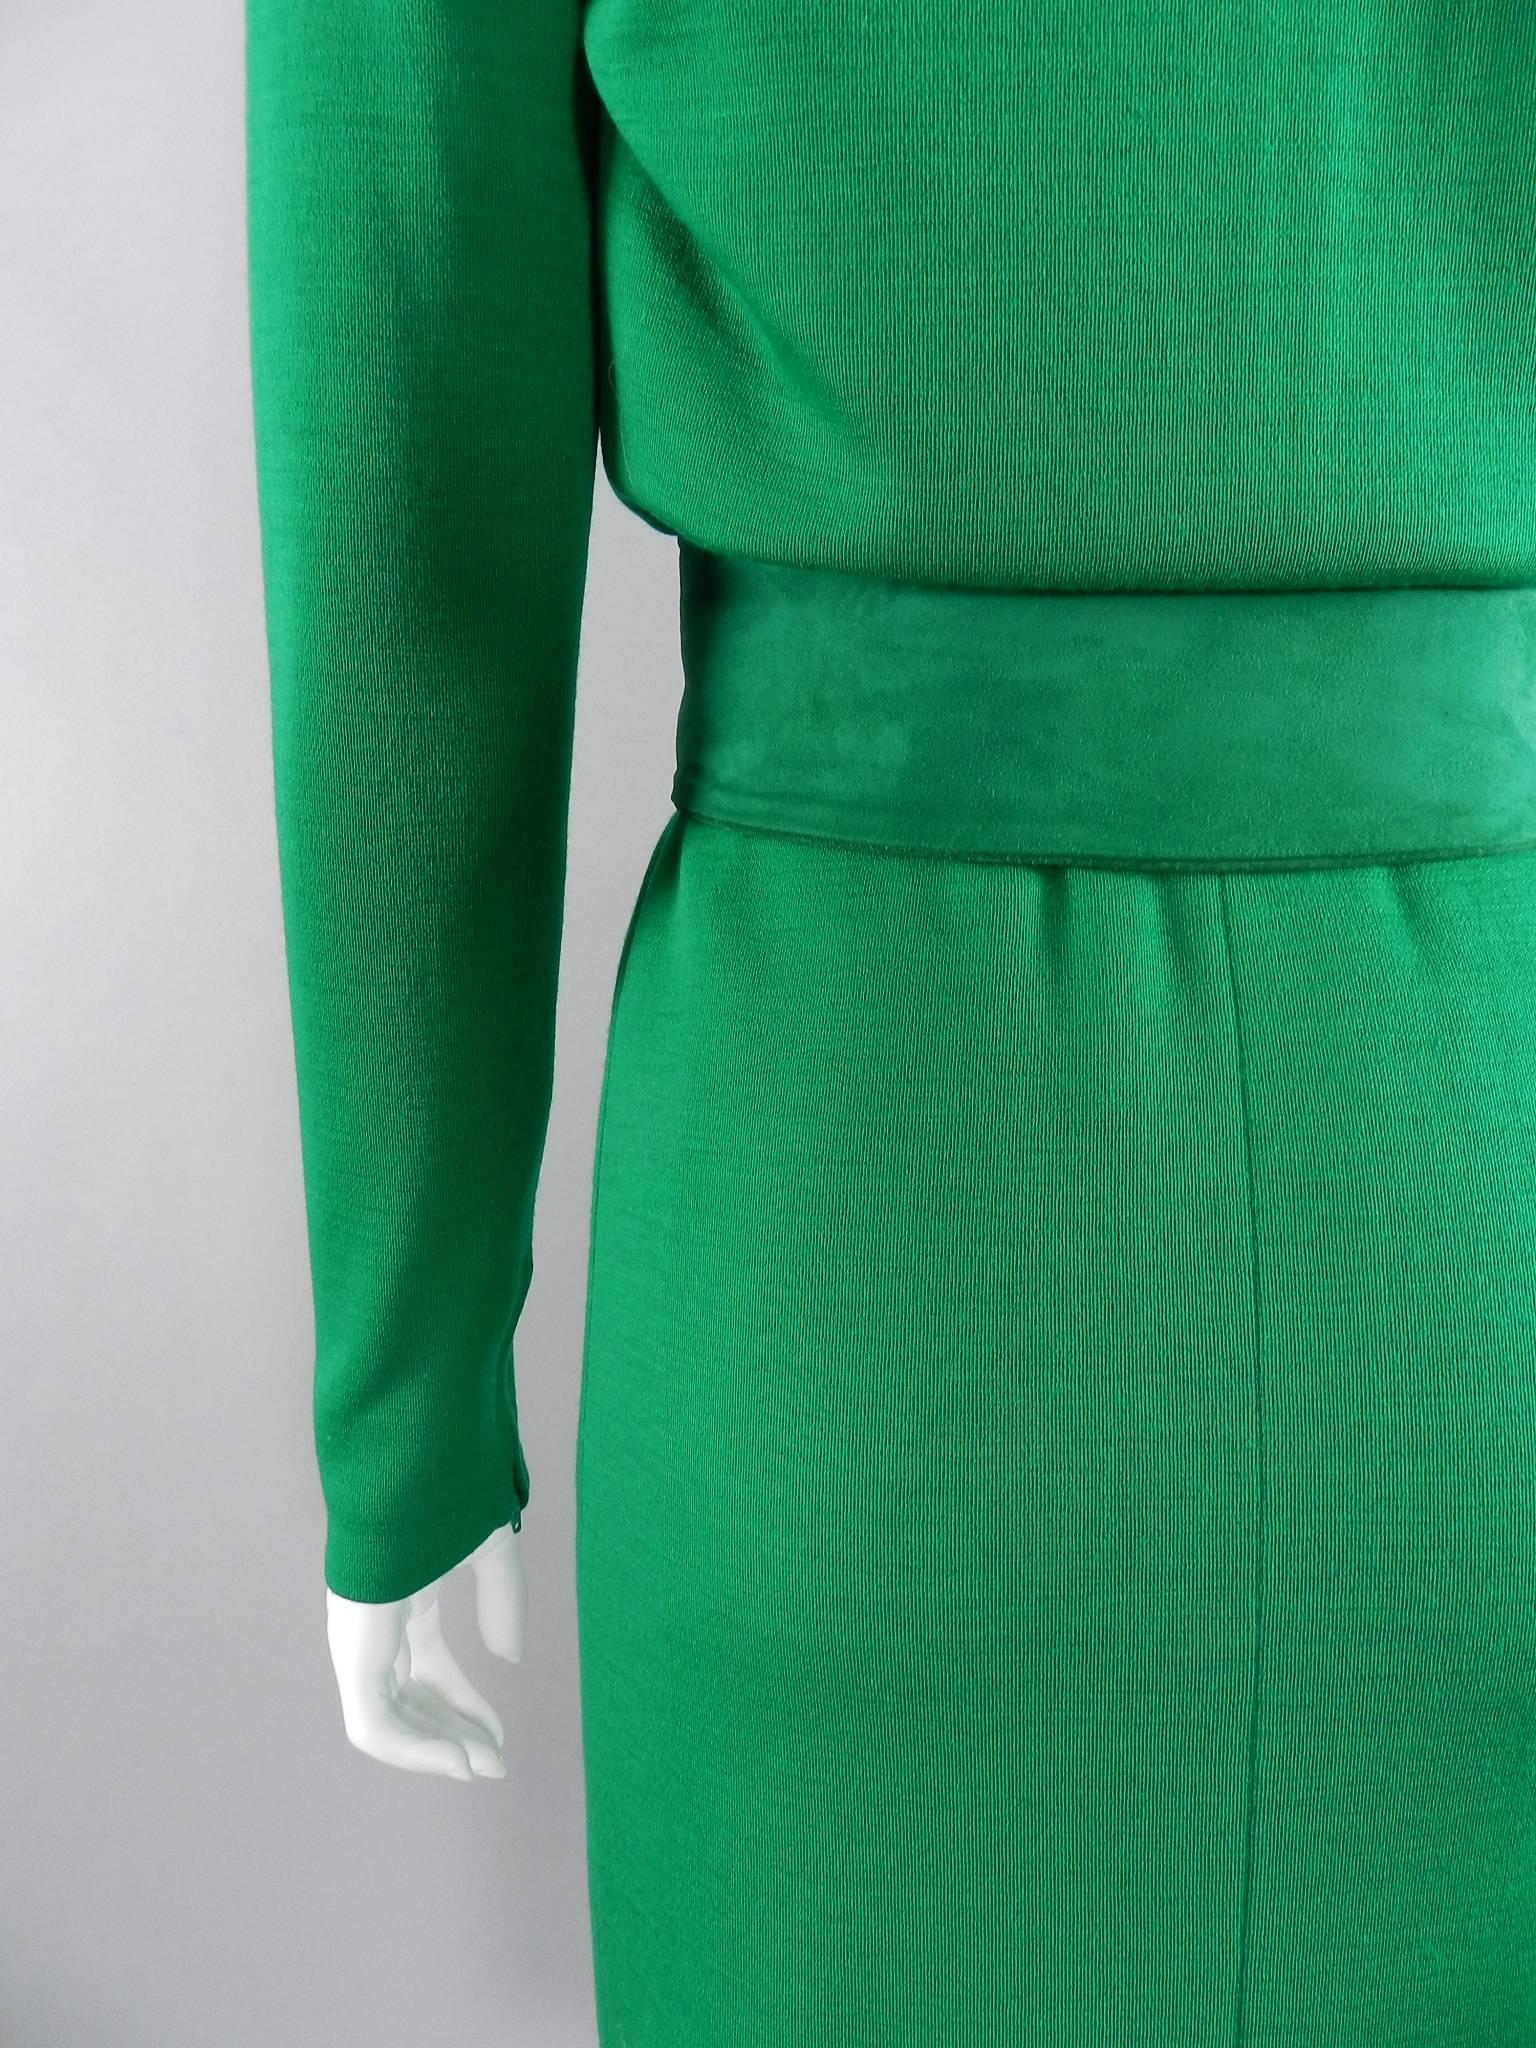 YSL Yves Saint Laurent Haute Couture Vintage 1990's Green Wool Knit Jersey Dress 1